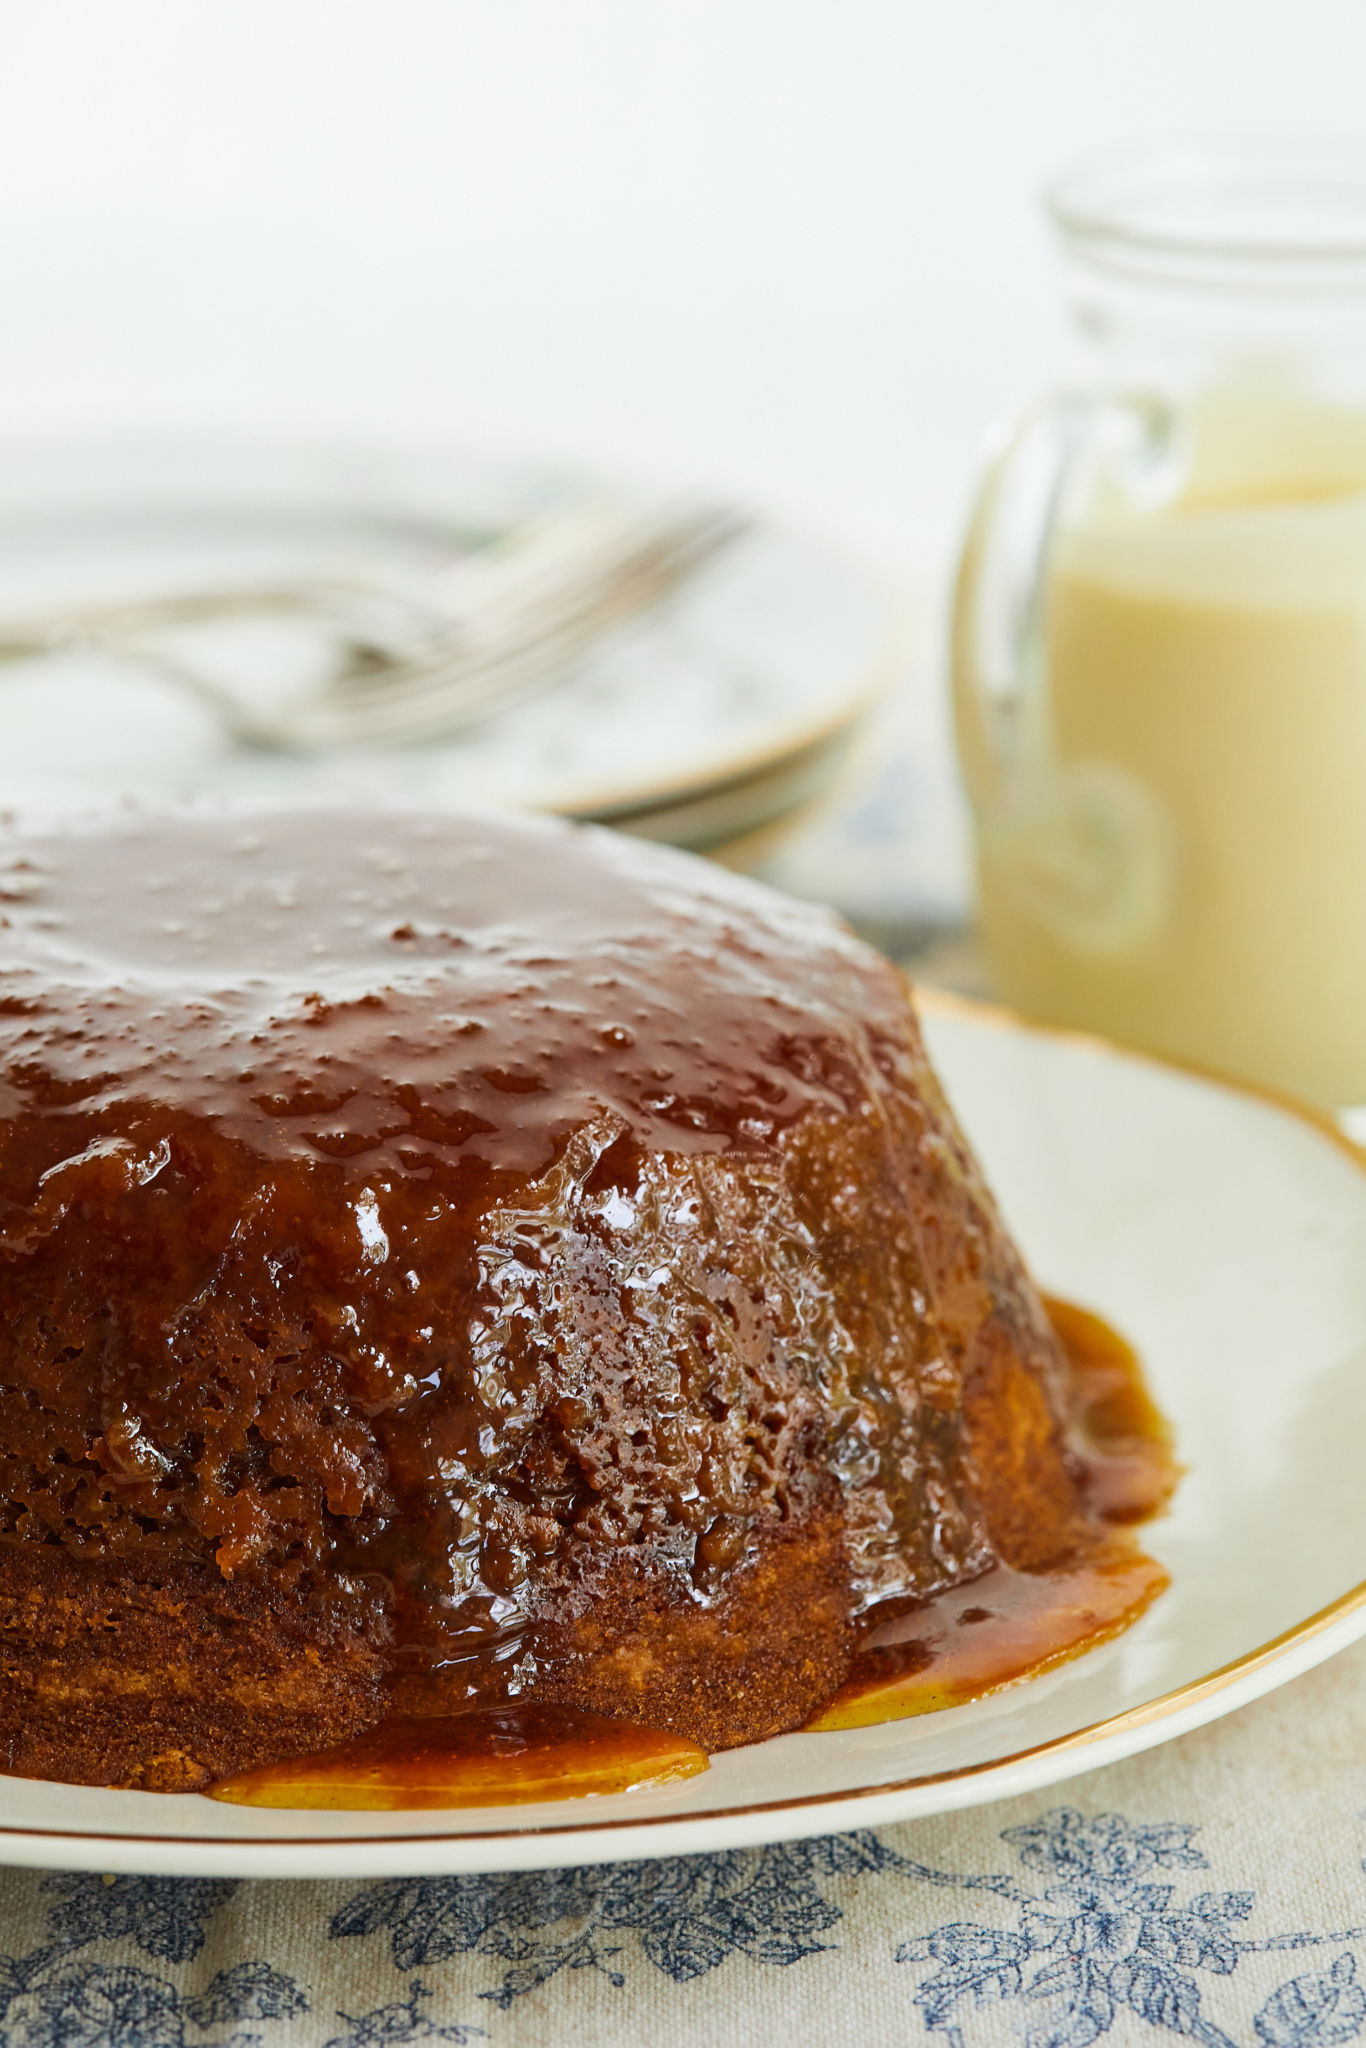 A treacle pudding next to some creme anglaise.